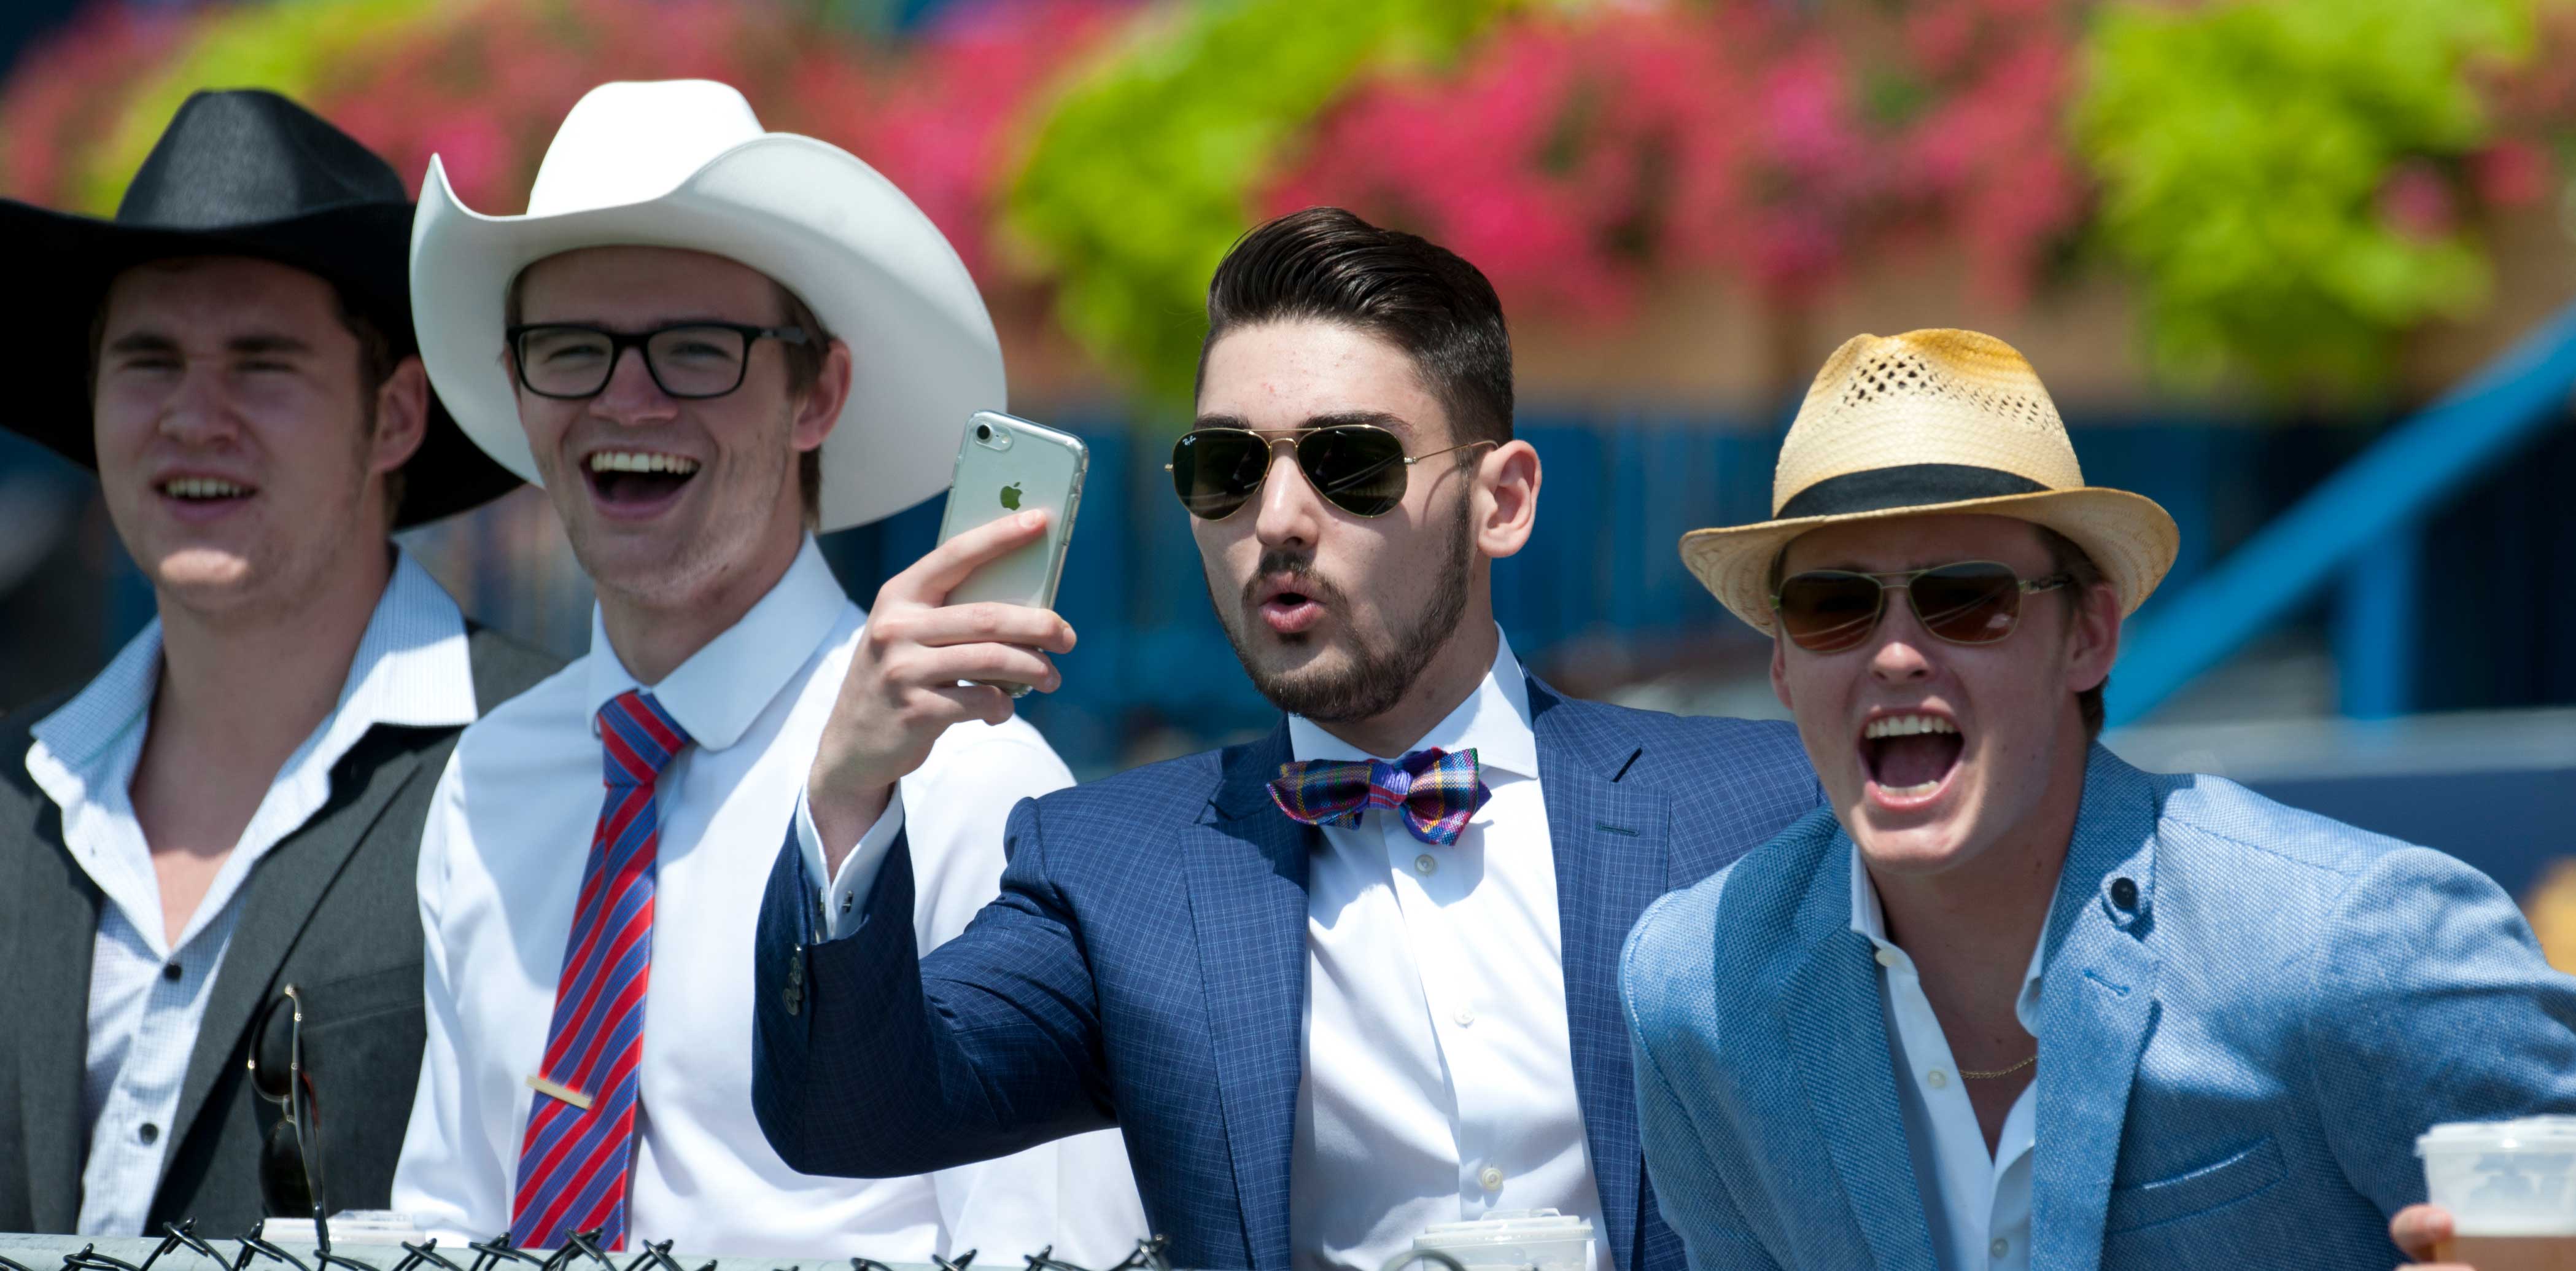 Set your own trends at the Plate at Woodbine Racetrack